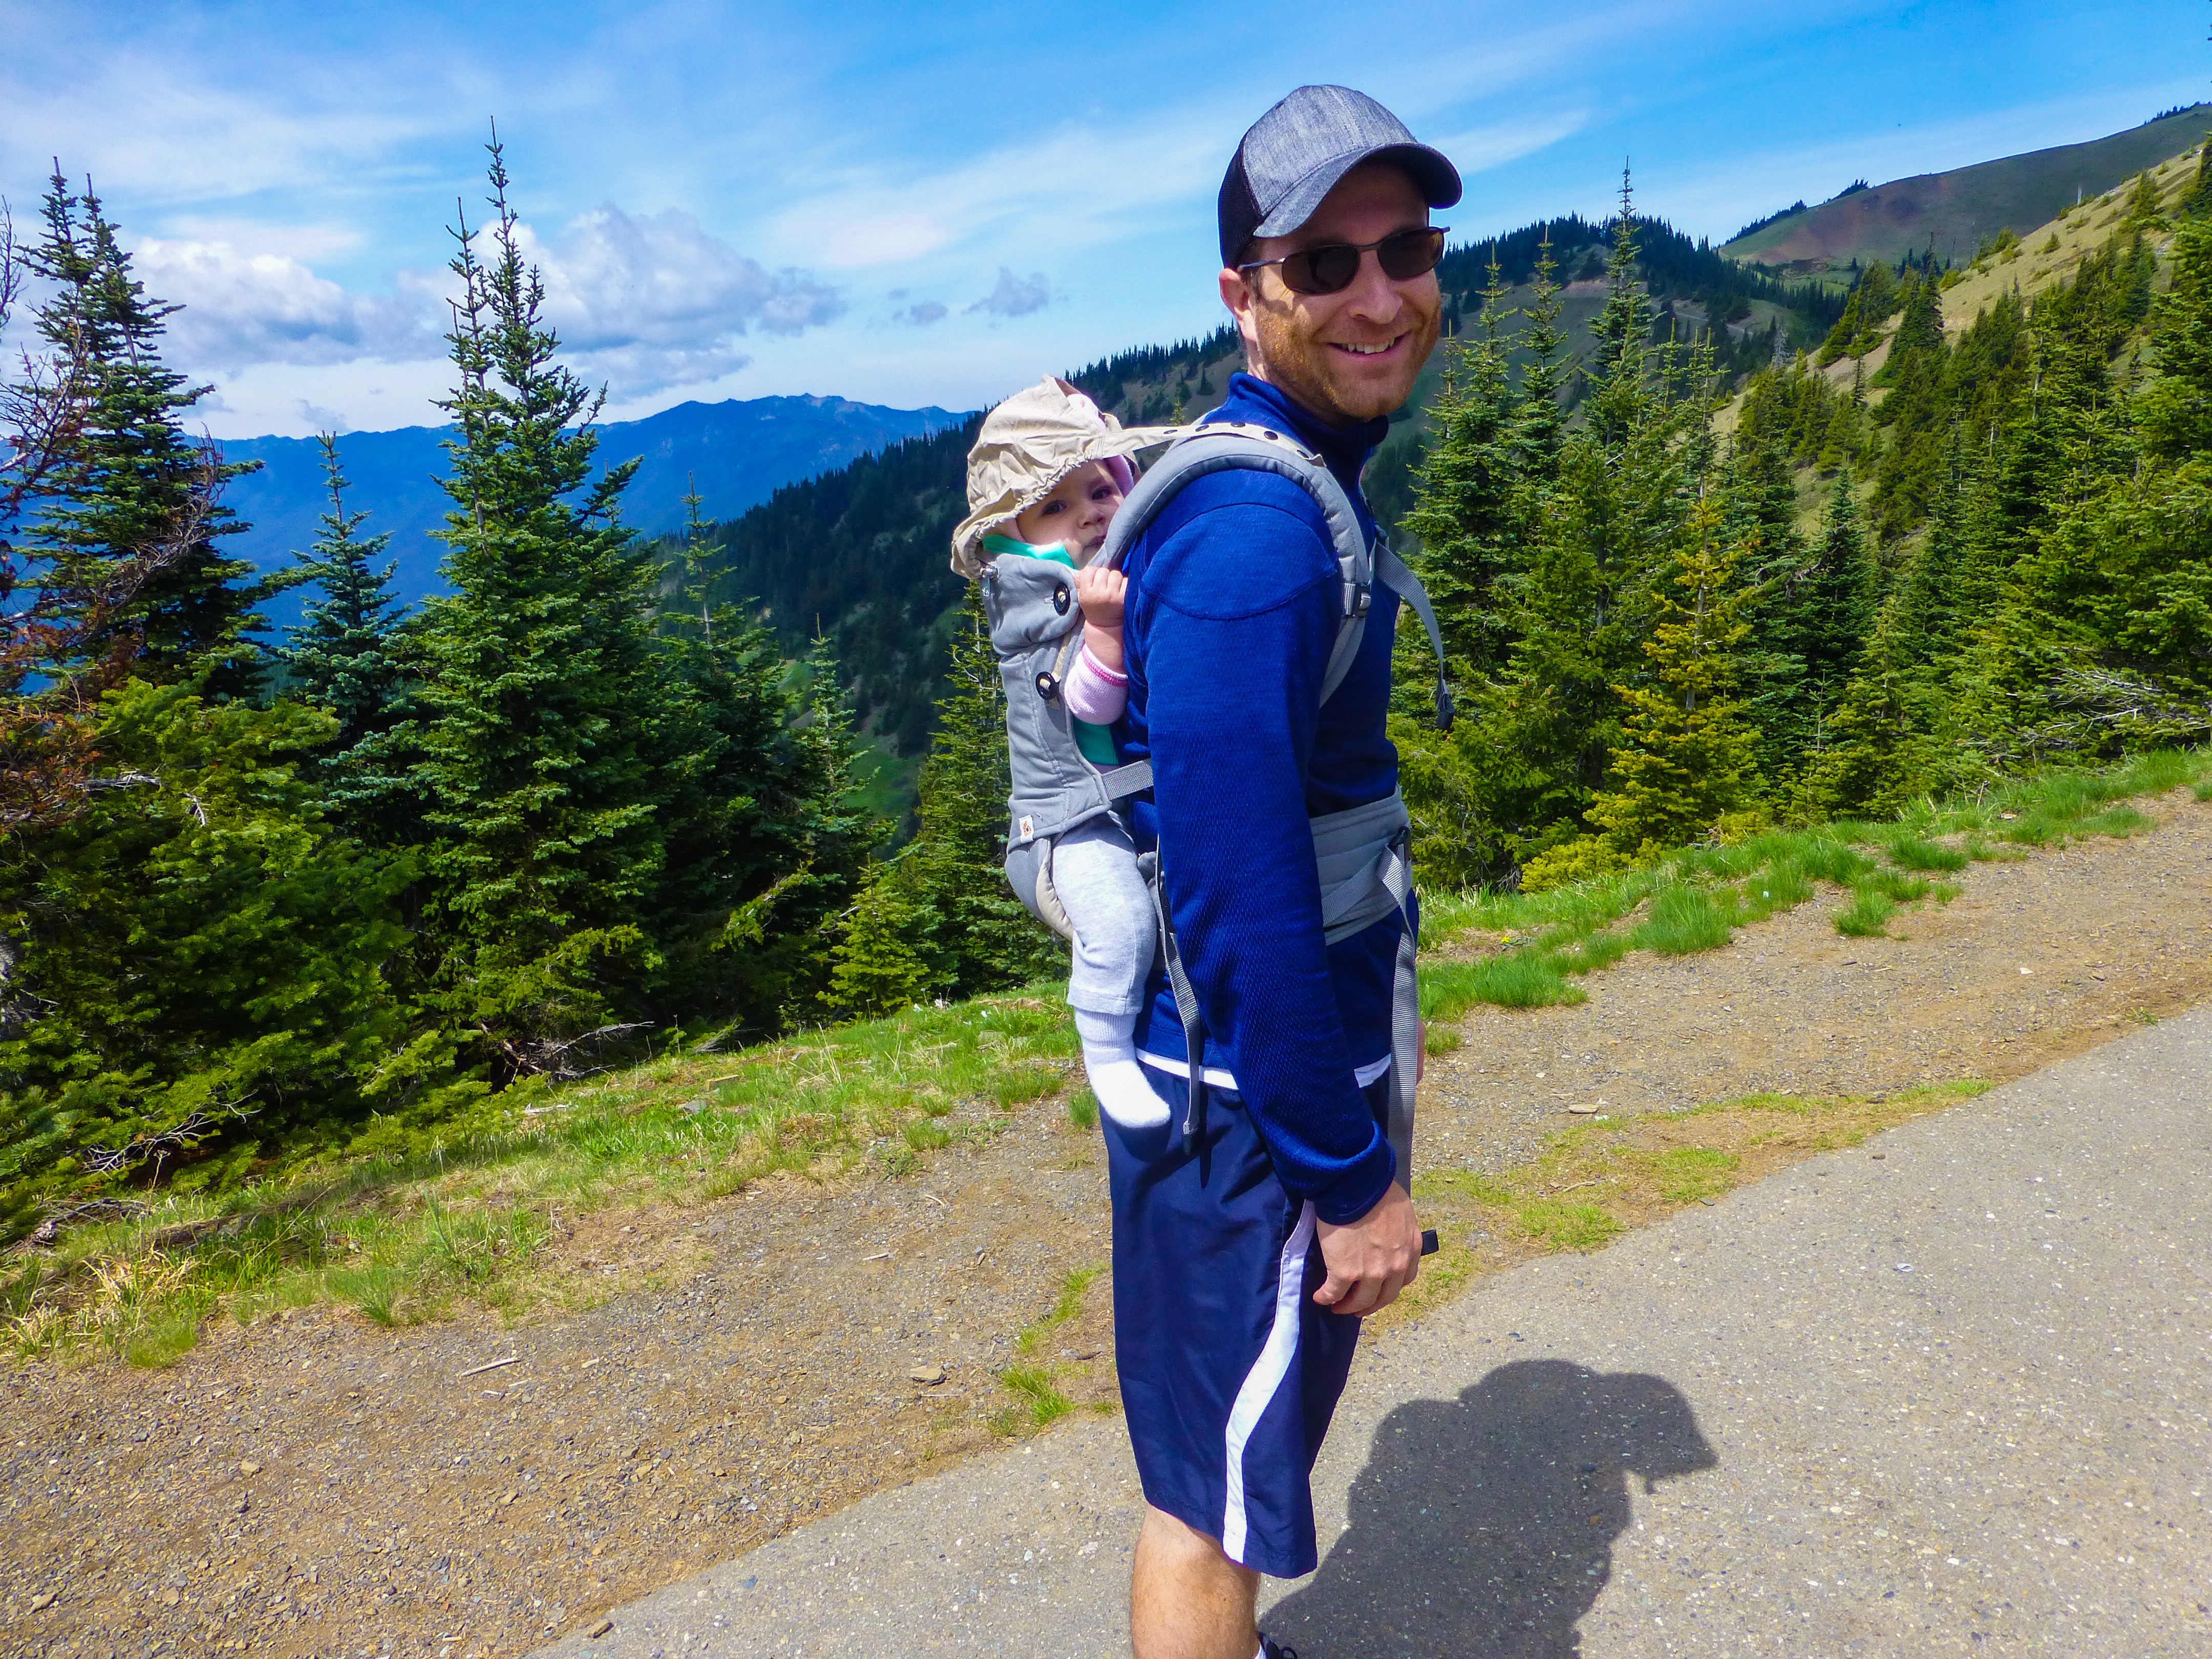 best hiking carrier